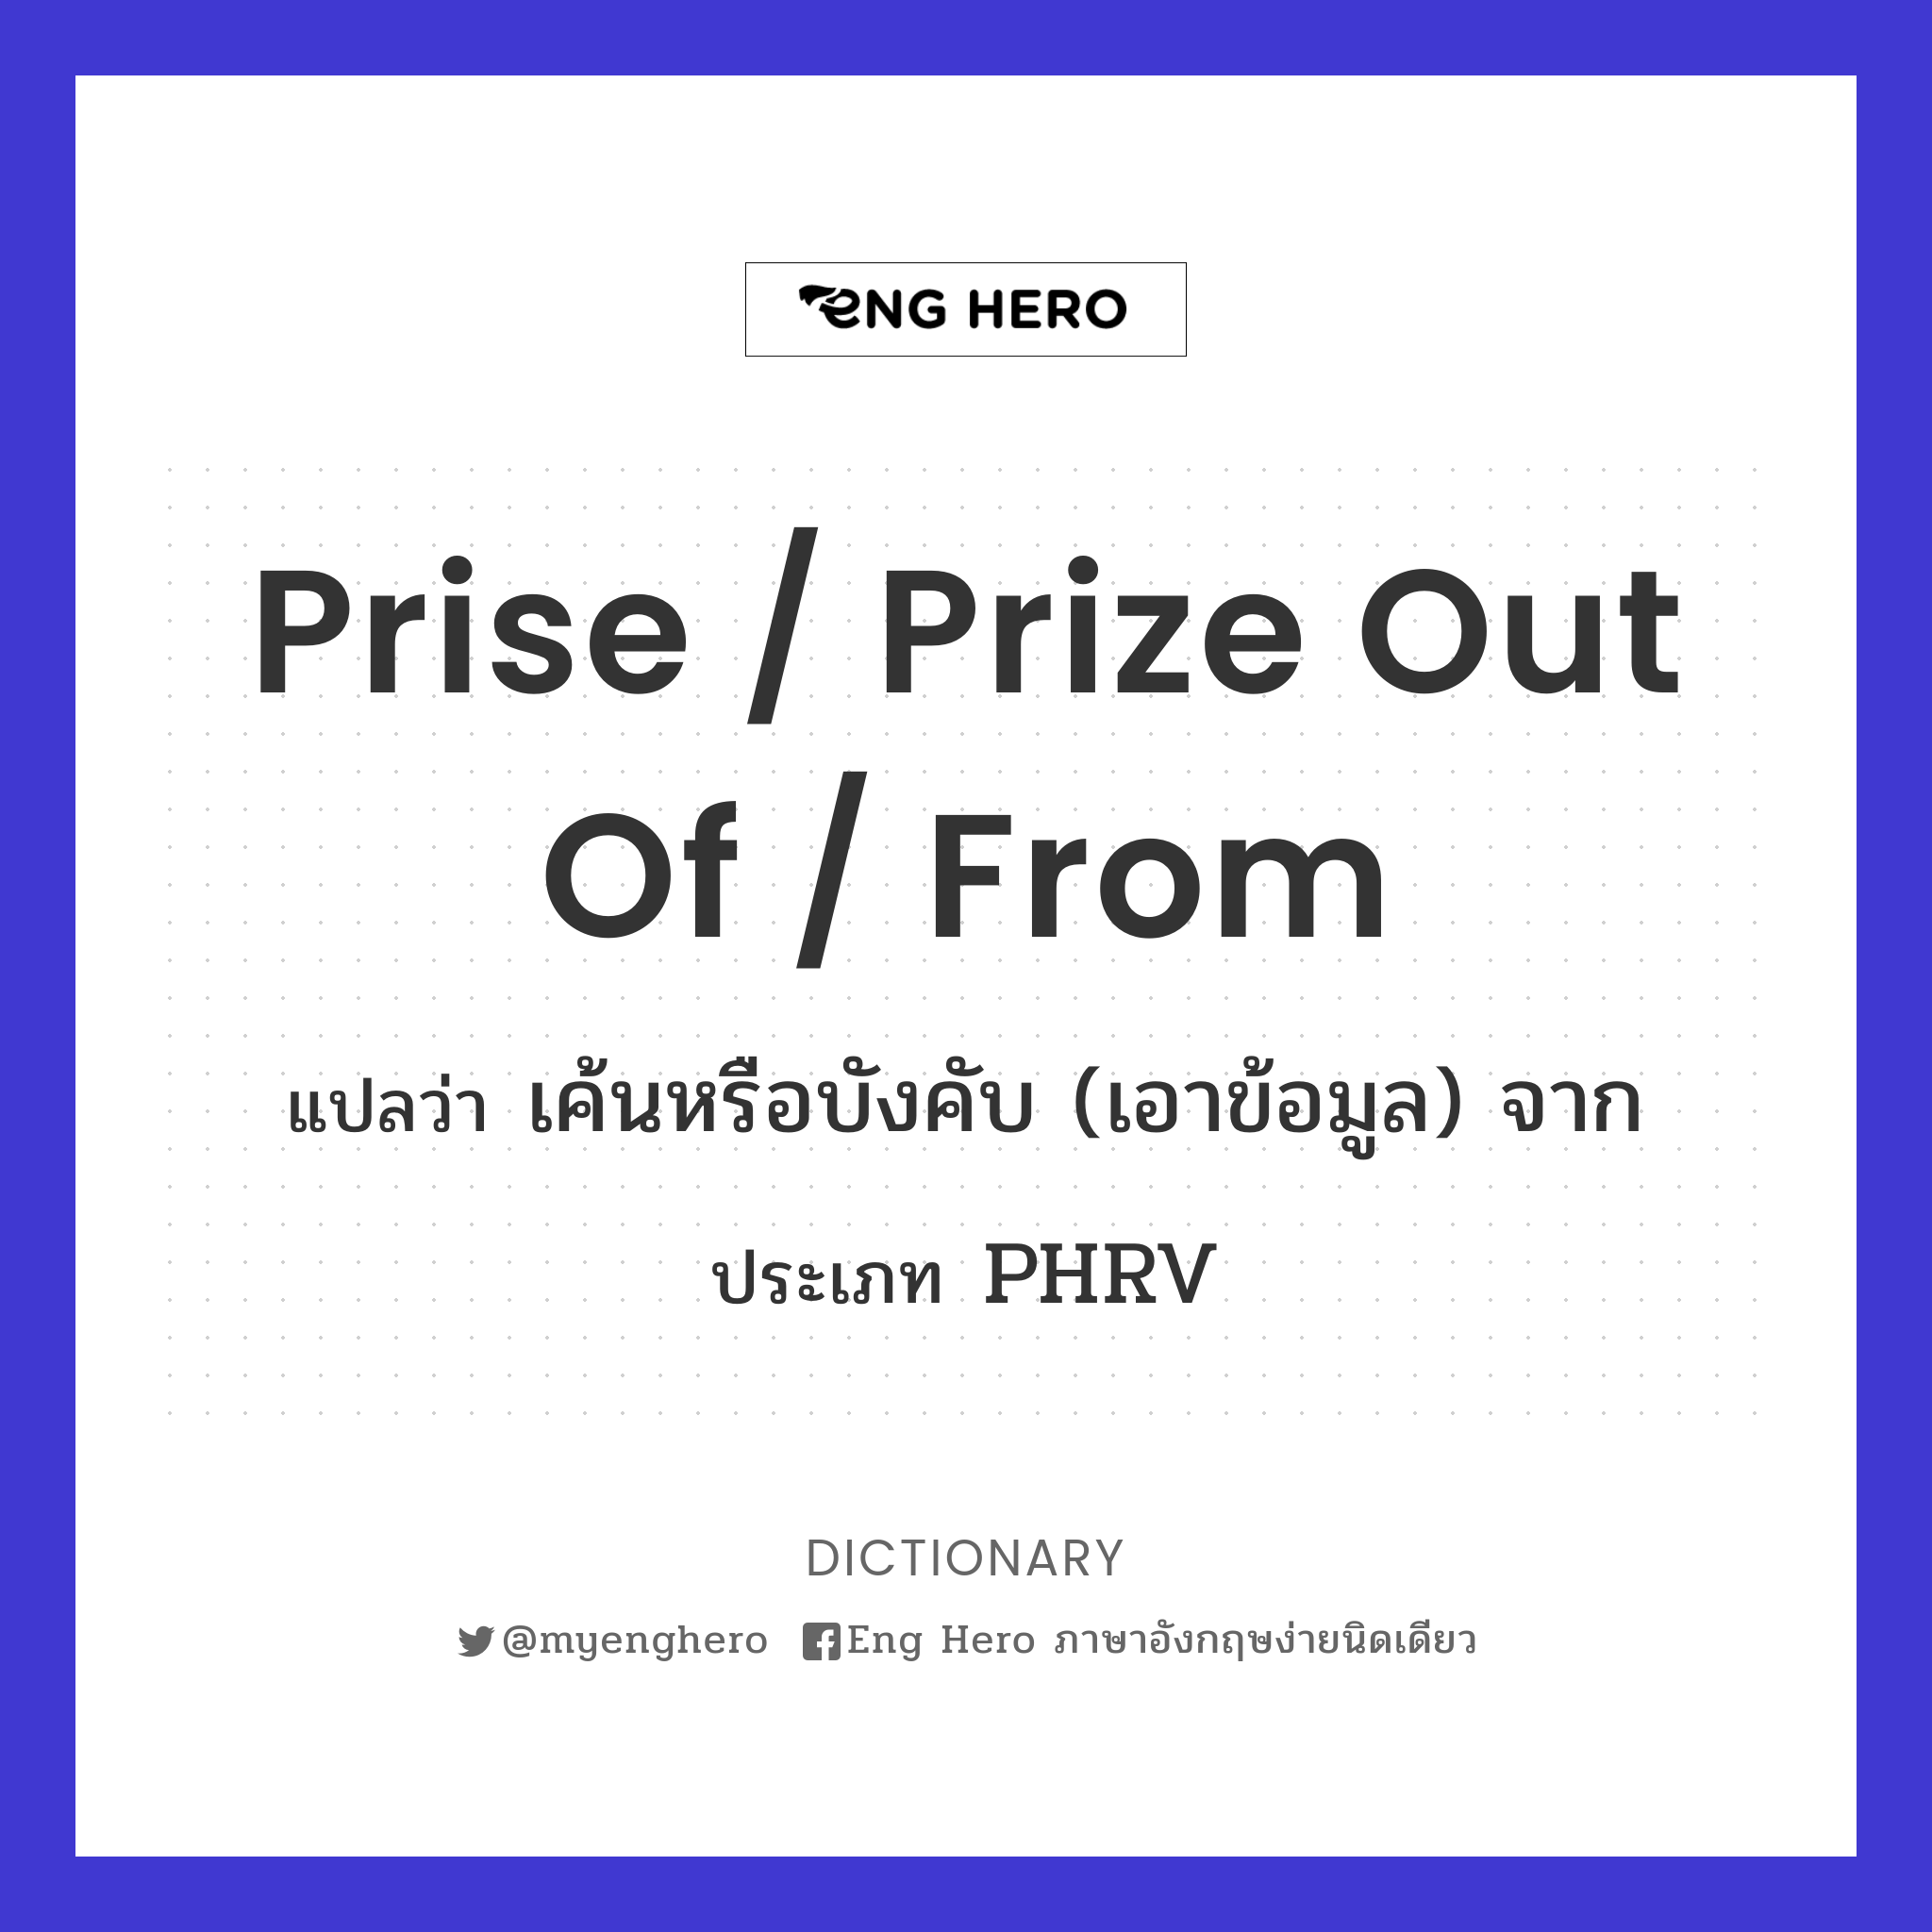 prise / prize out of / from